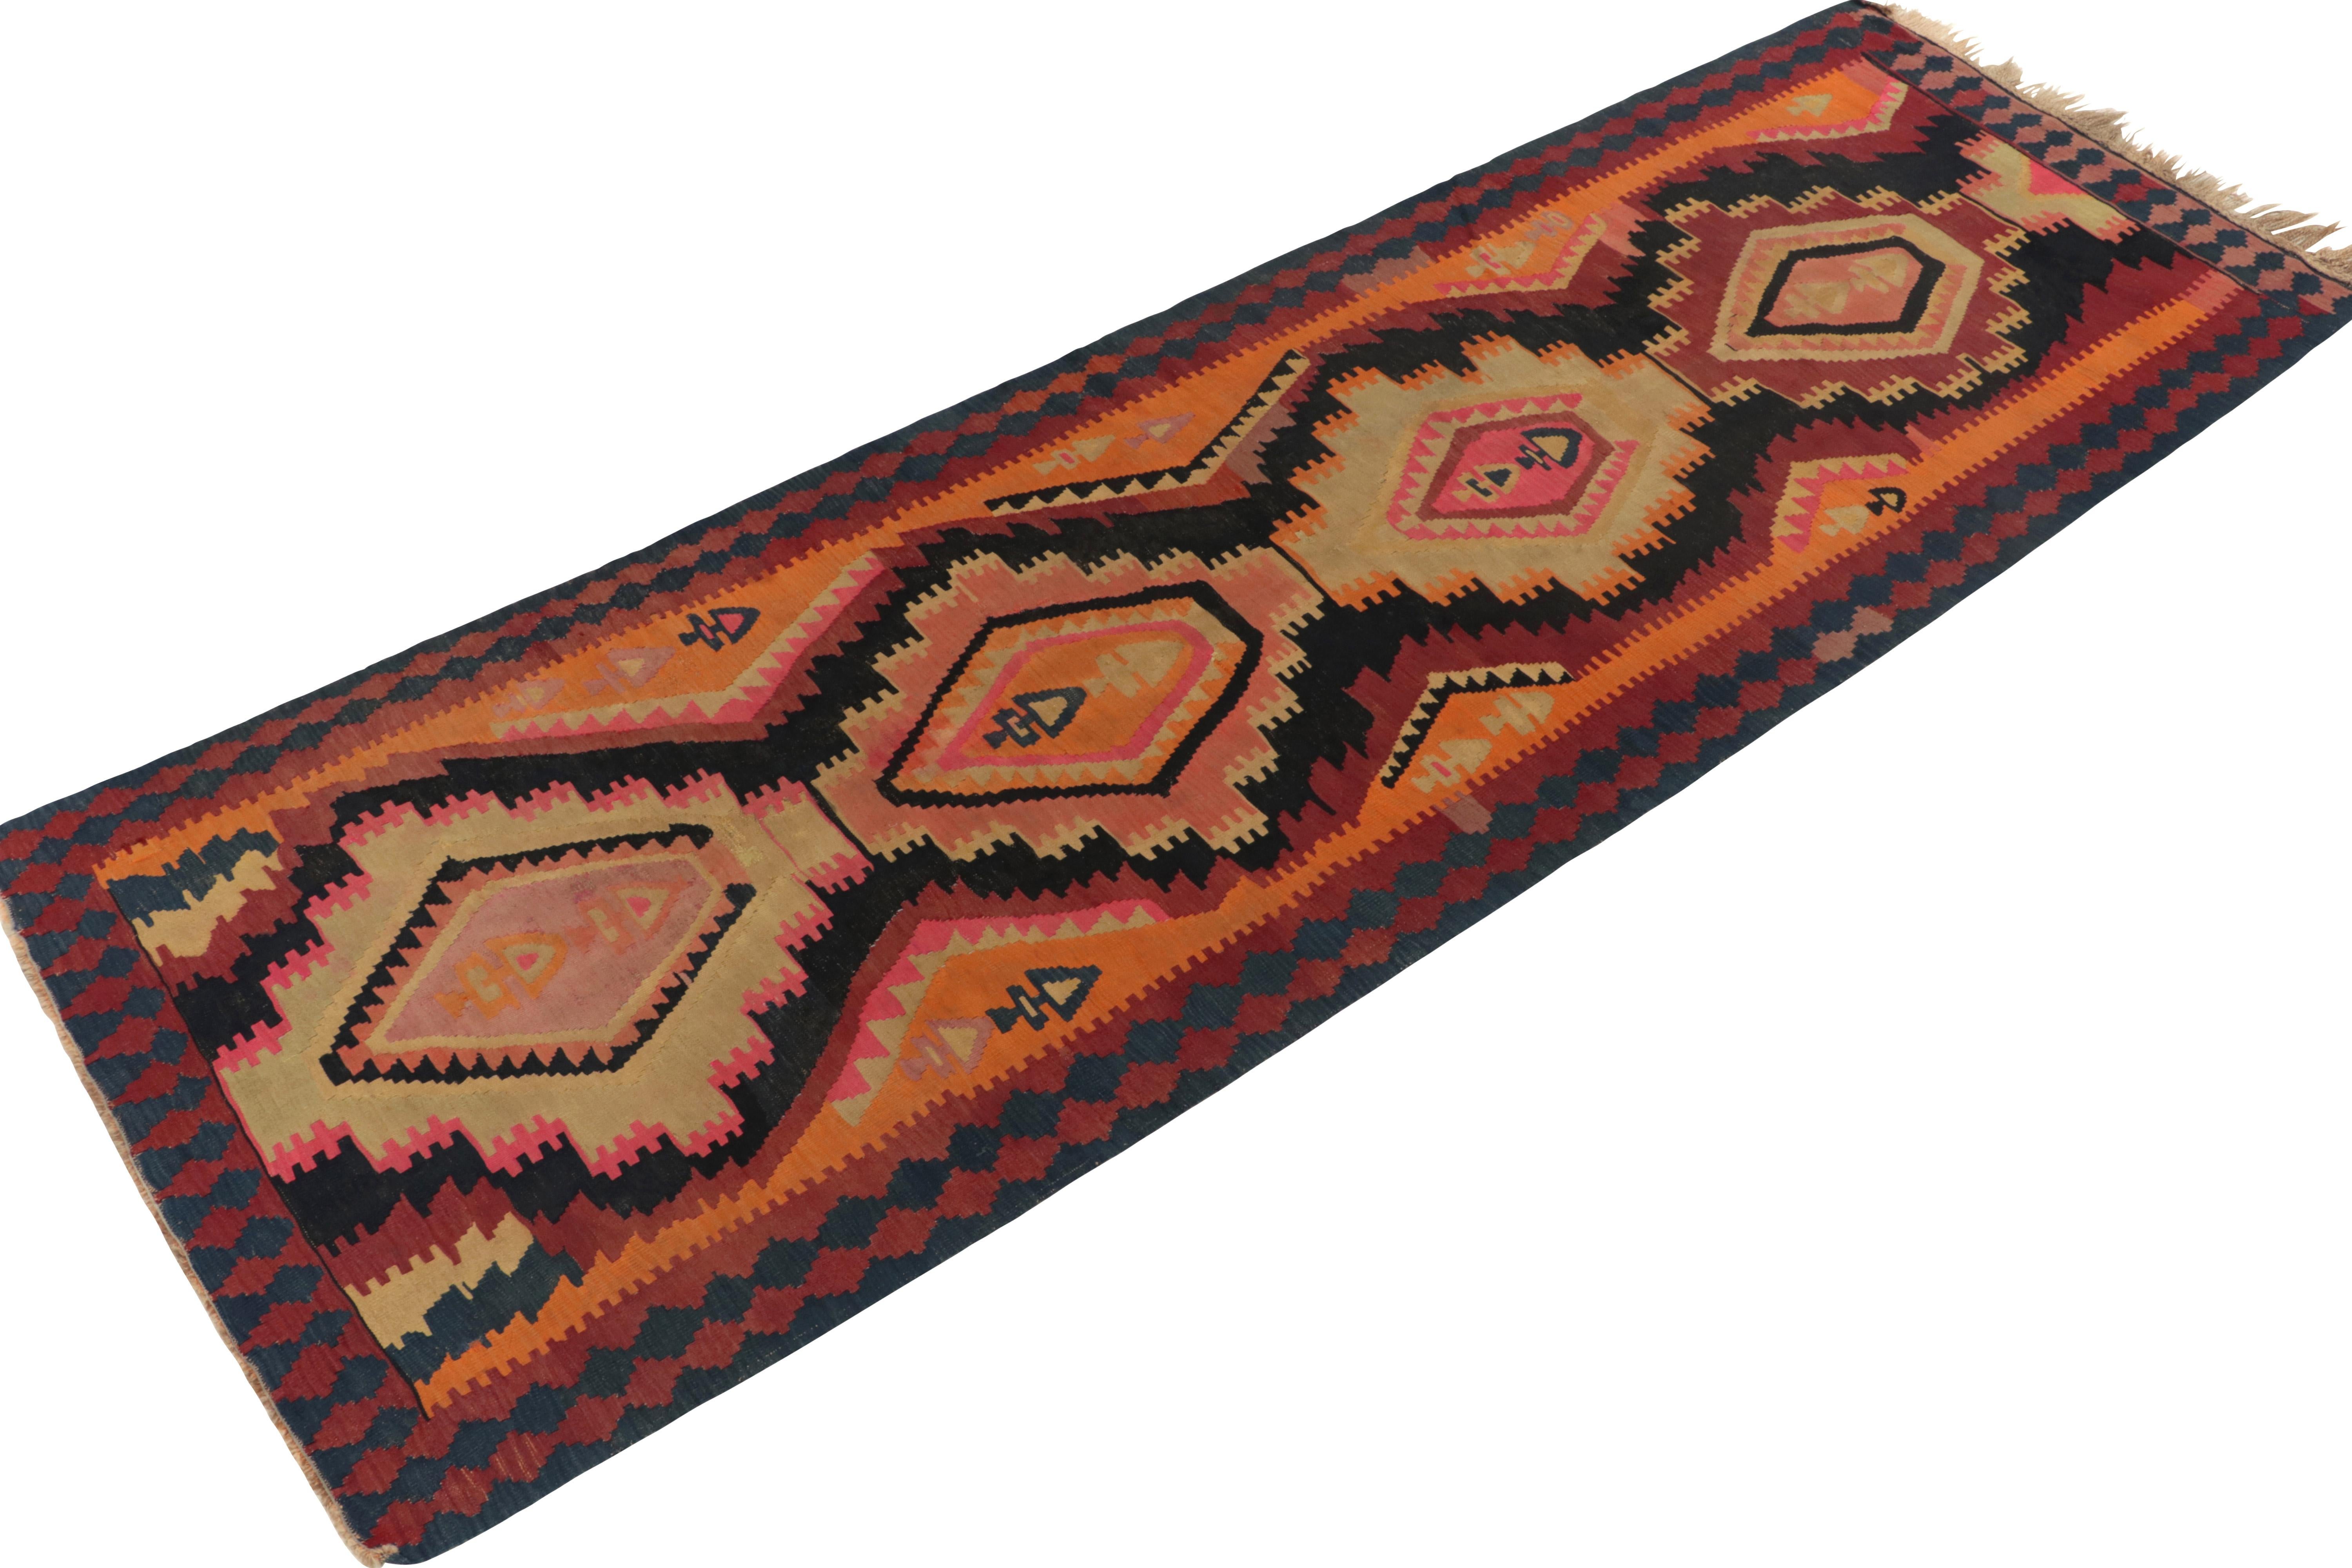 Handwoven in wool, this antique Kilim is the latest unveiling from R&K Principal Josh Nazmiyal’s coveted treasure of Persian masterpieces. 

Originating circa 1920-1930, this particular rug features an uncommon emphasis of colors with rich red,